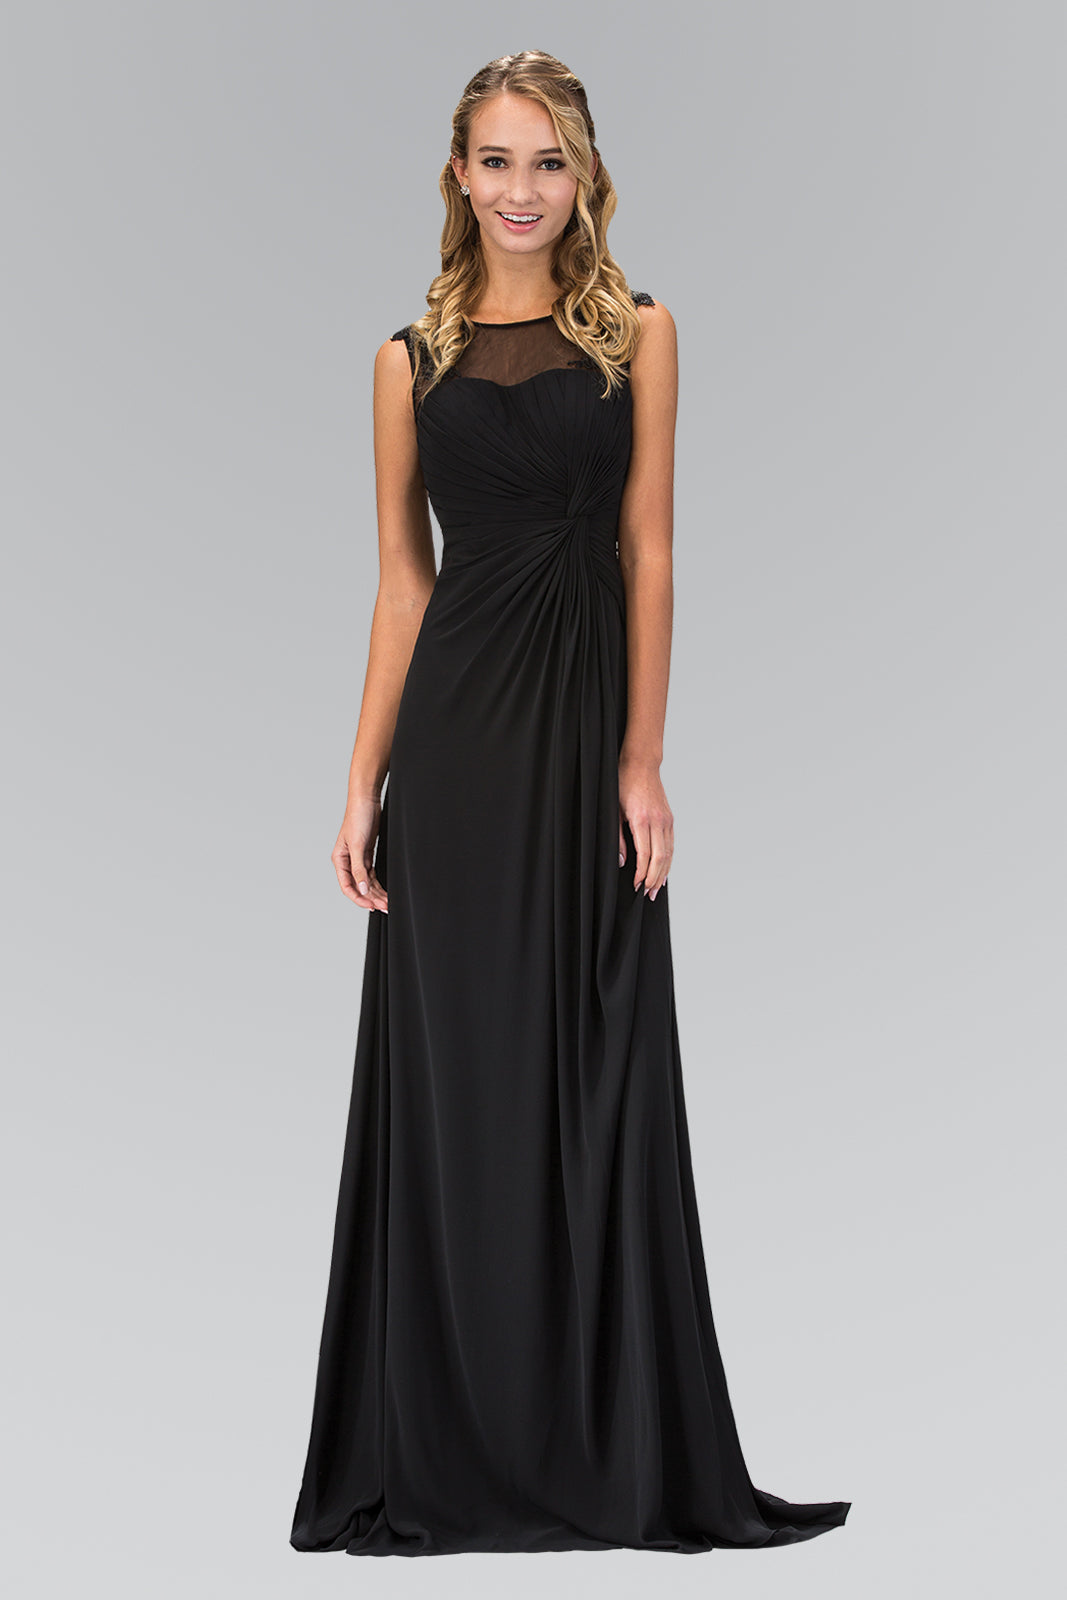 Ruched Floor Length Dress with Illusion Neckline and Sheer Back-smcdress